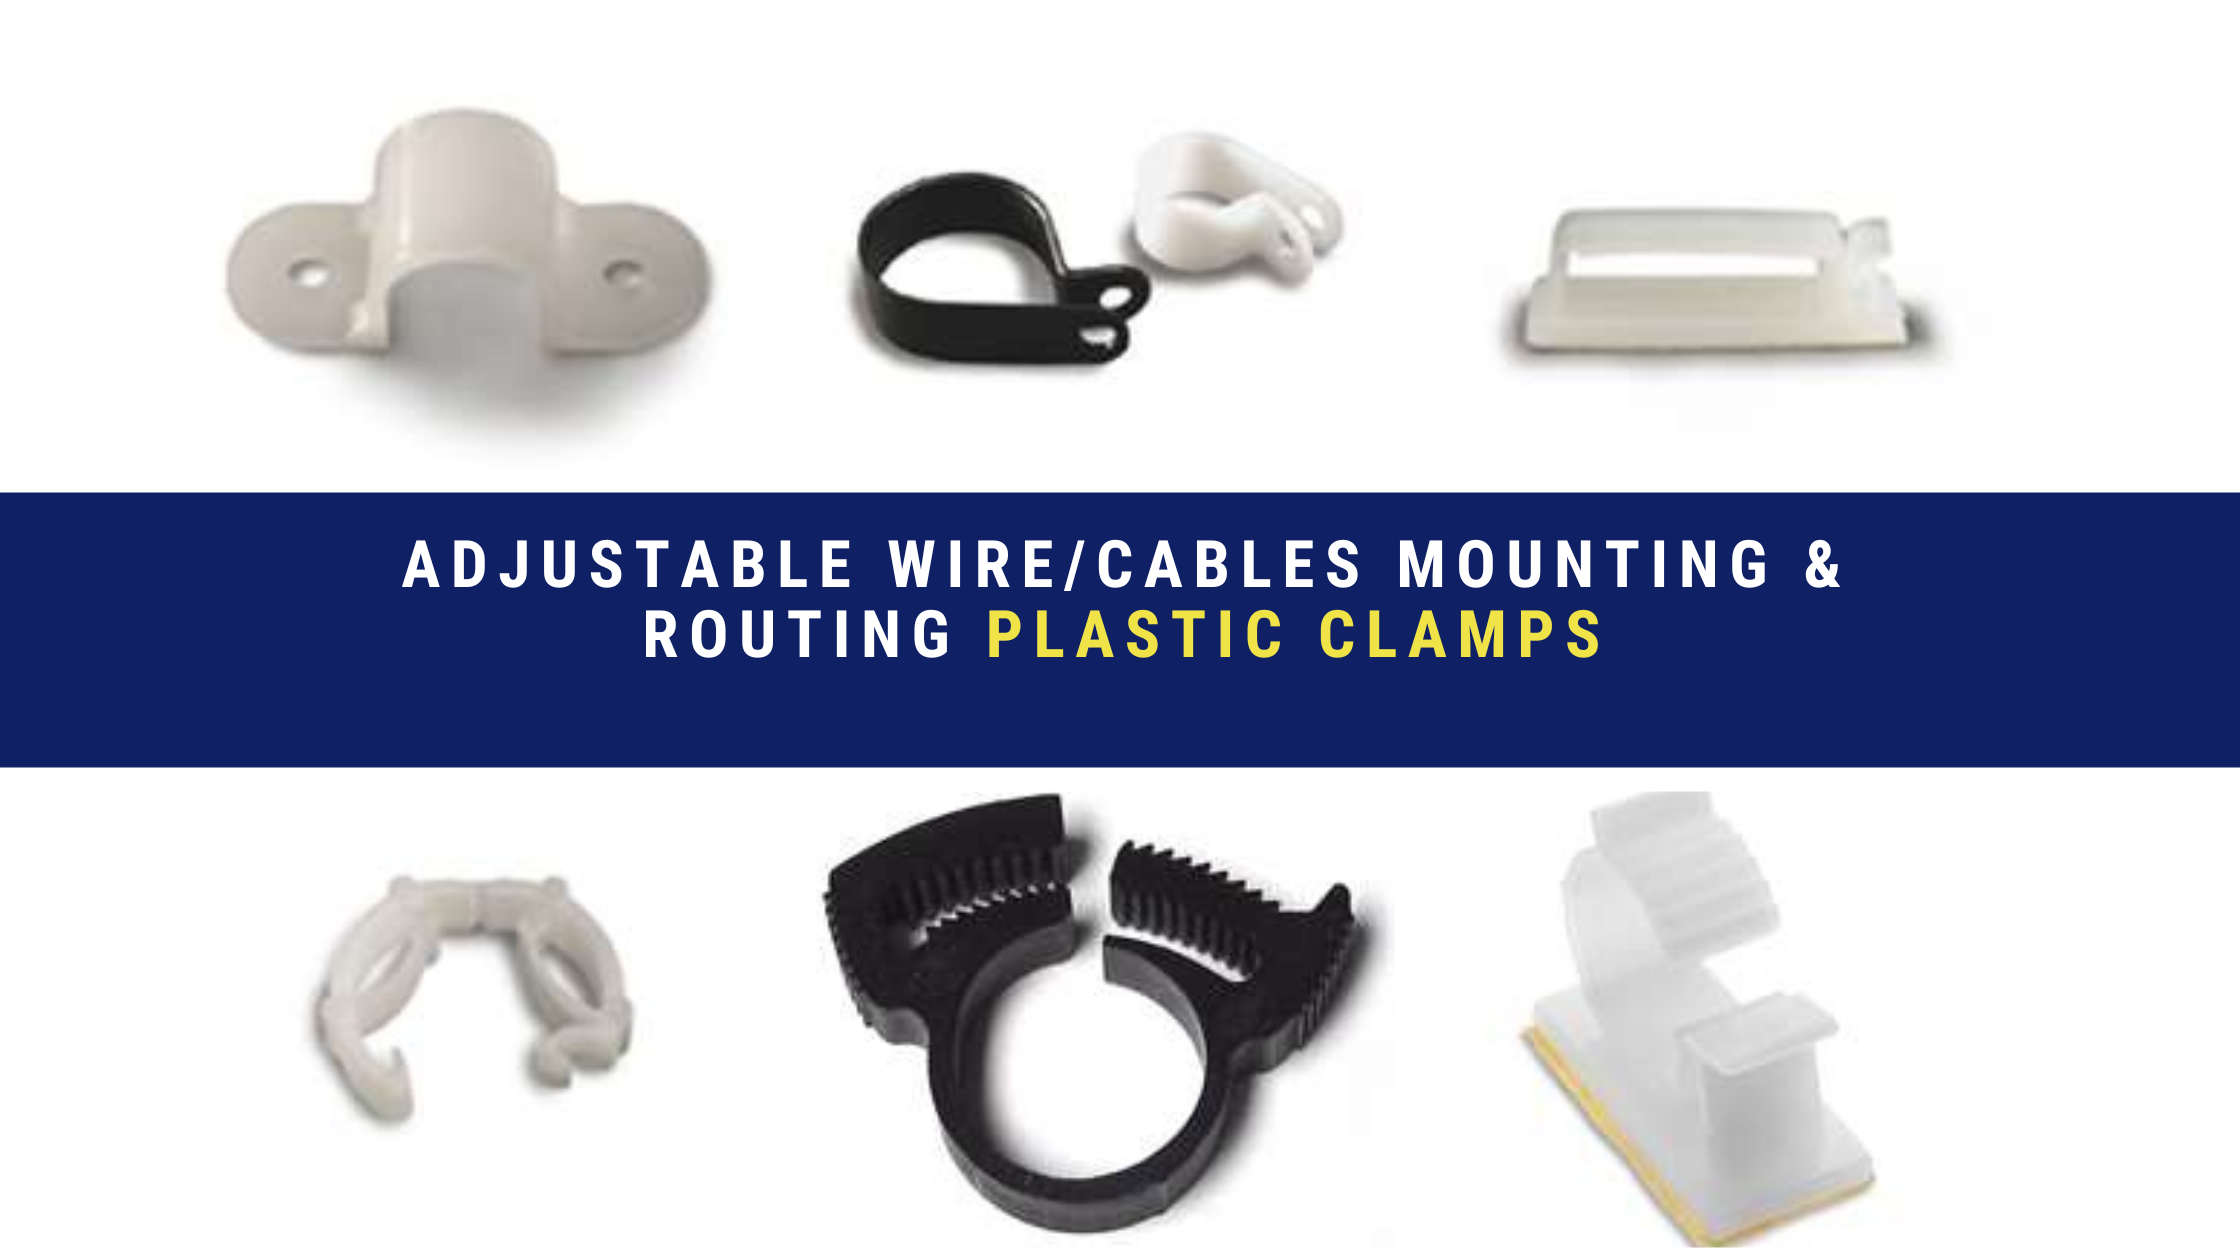 Adjustable Plastic Clamps A Versatile Releasable Clamp for Bundling and Securing Wires and Cables